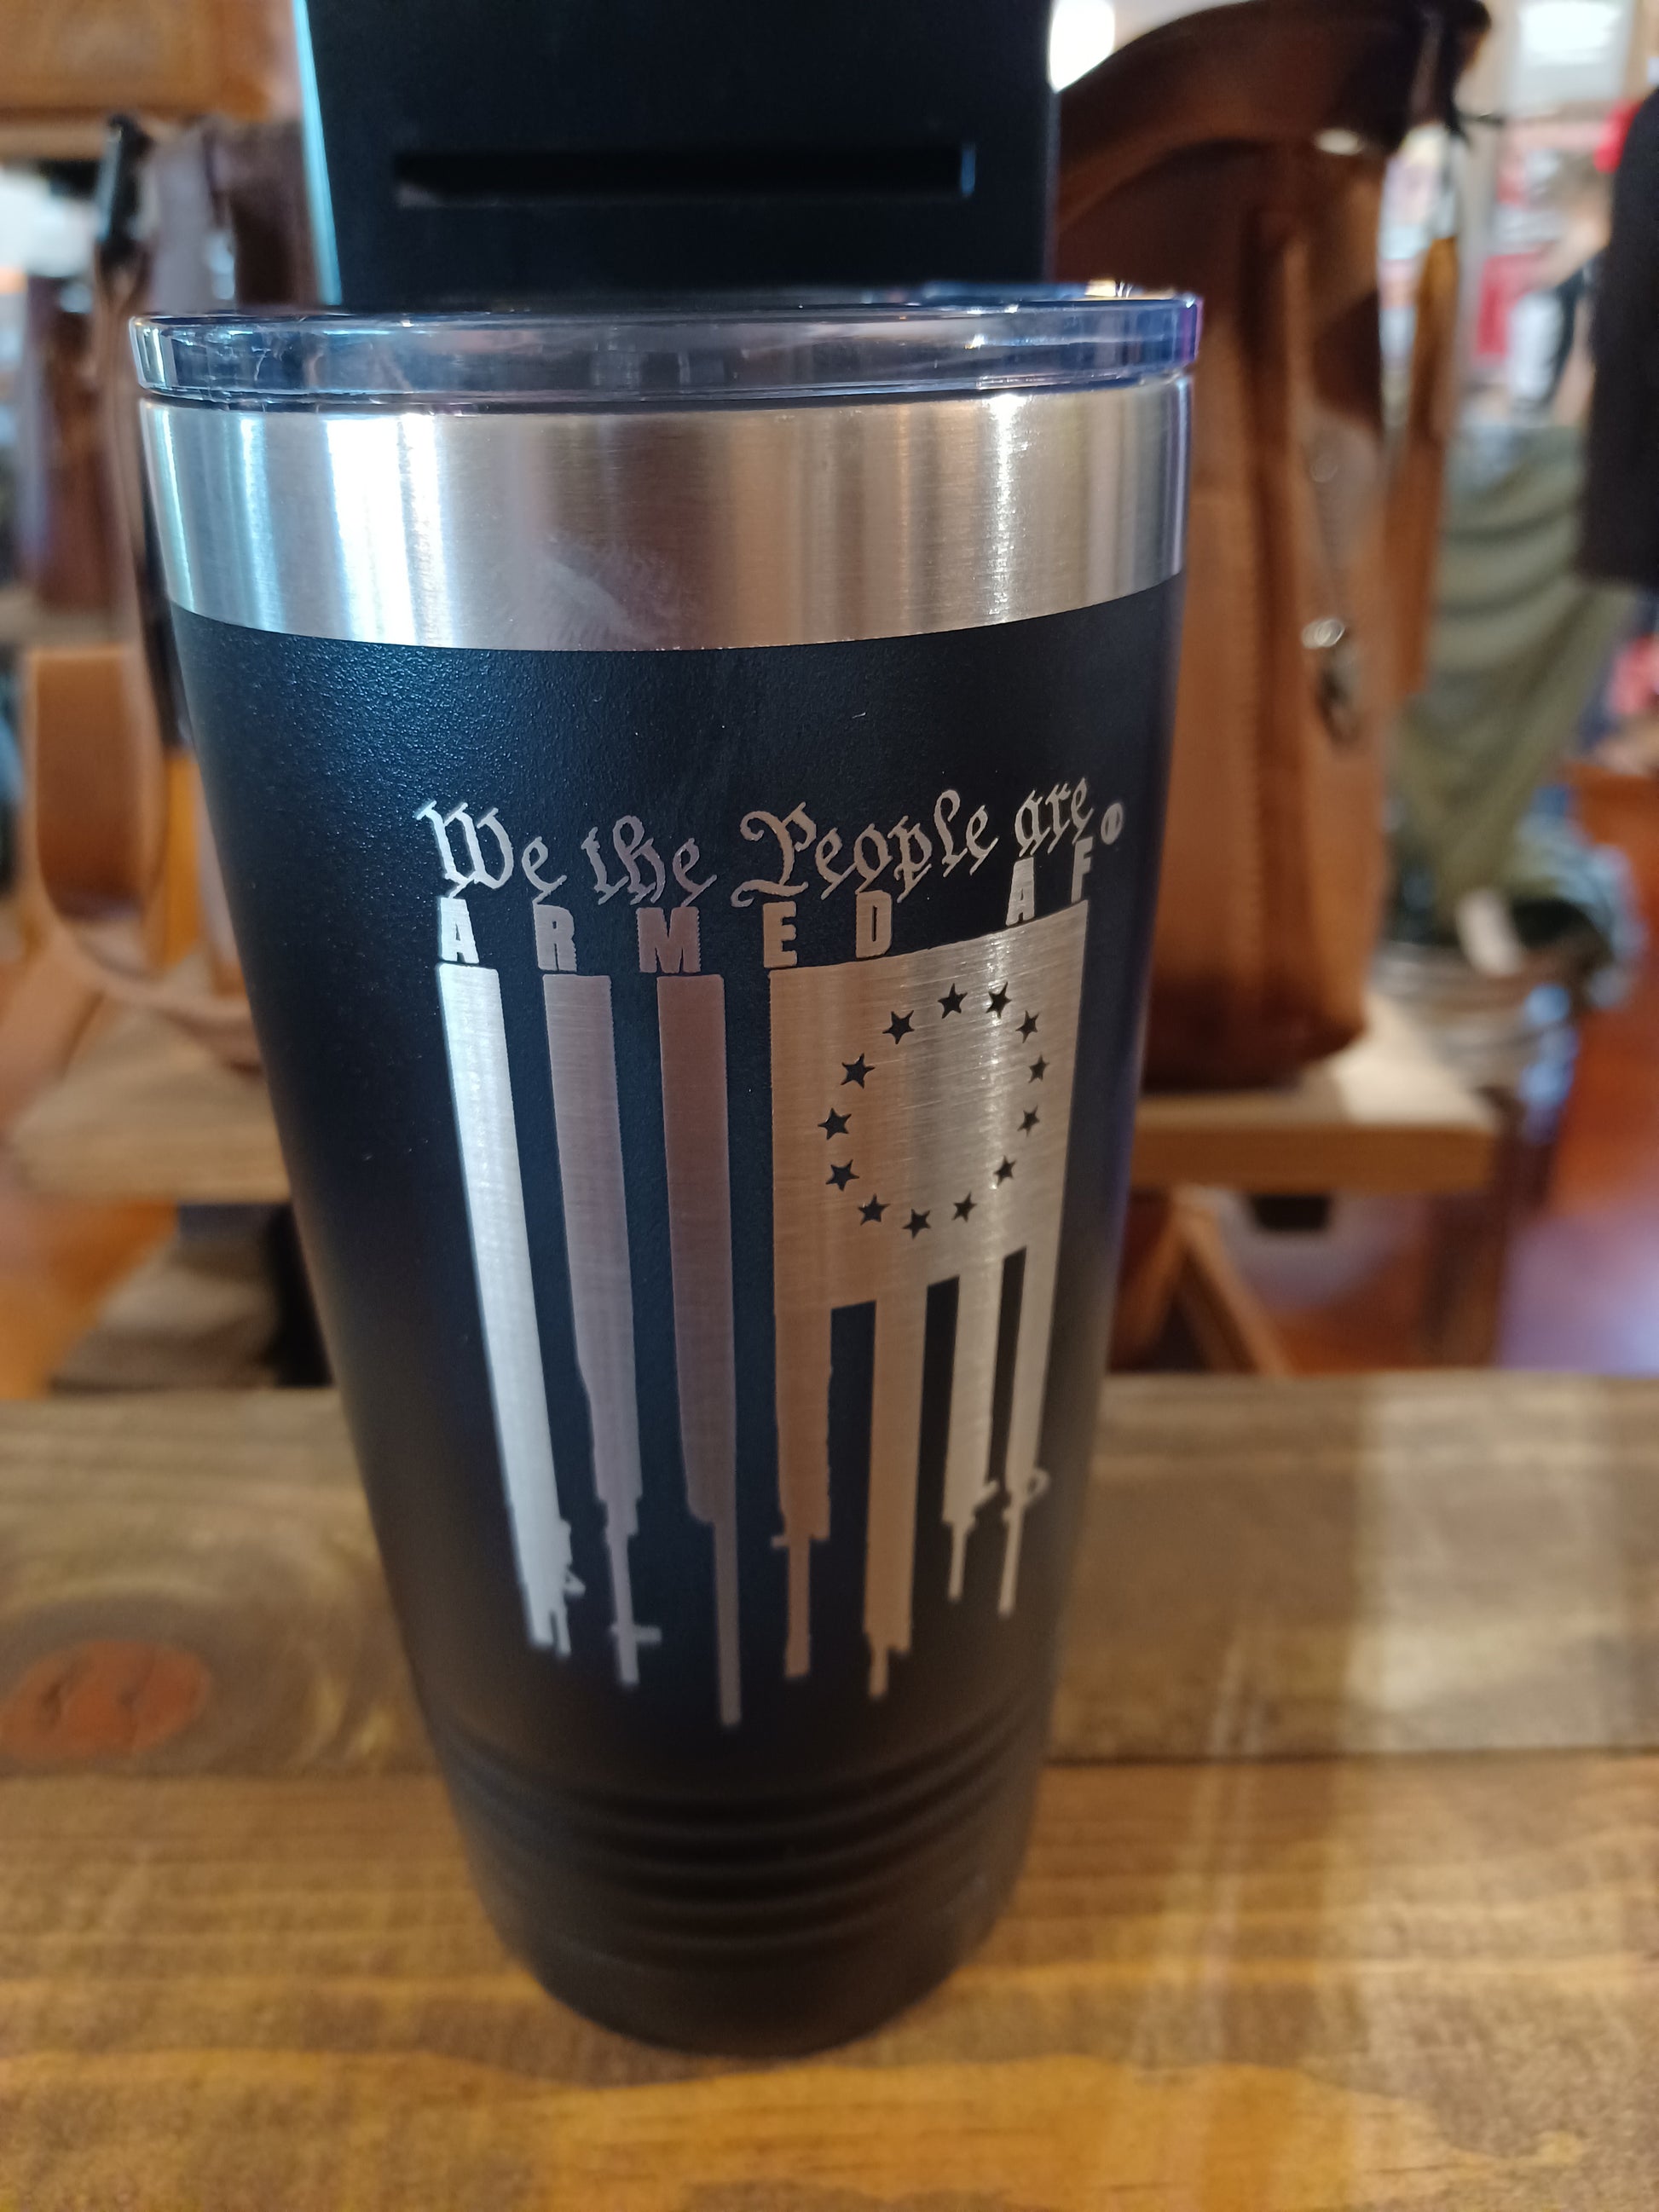 Second Amendment coffee tumbler on display in store